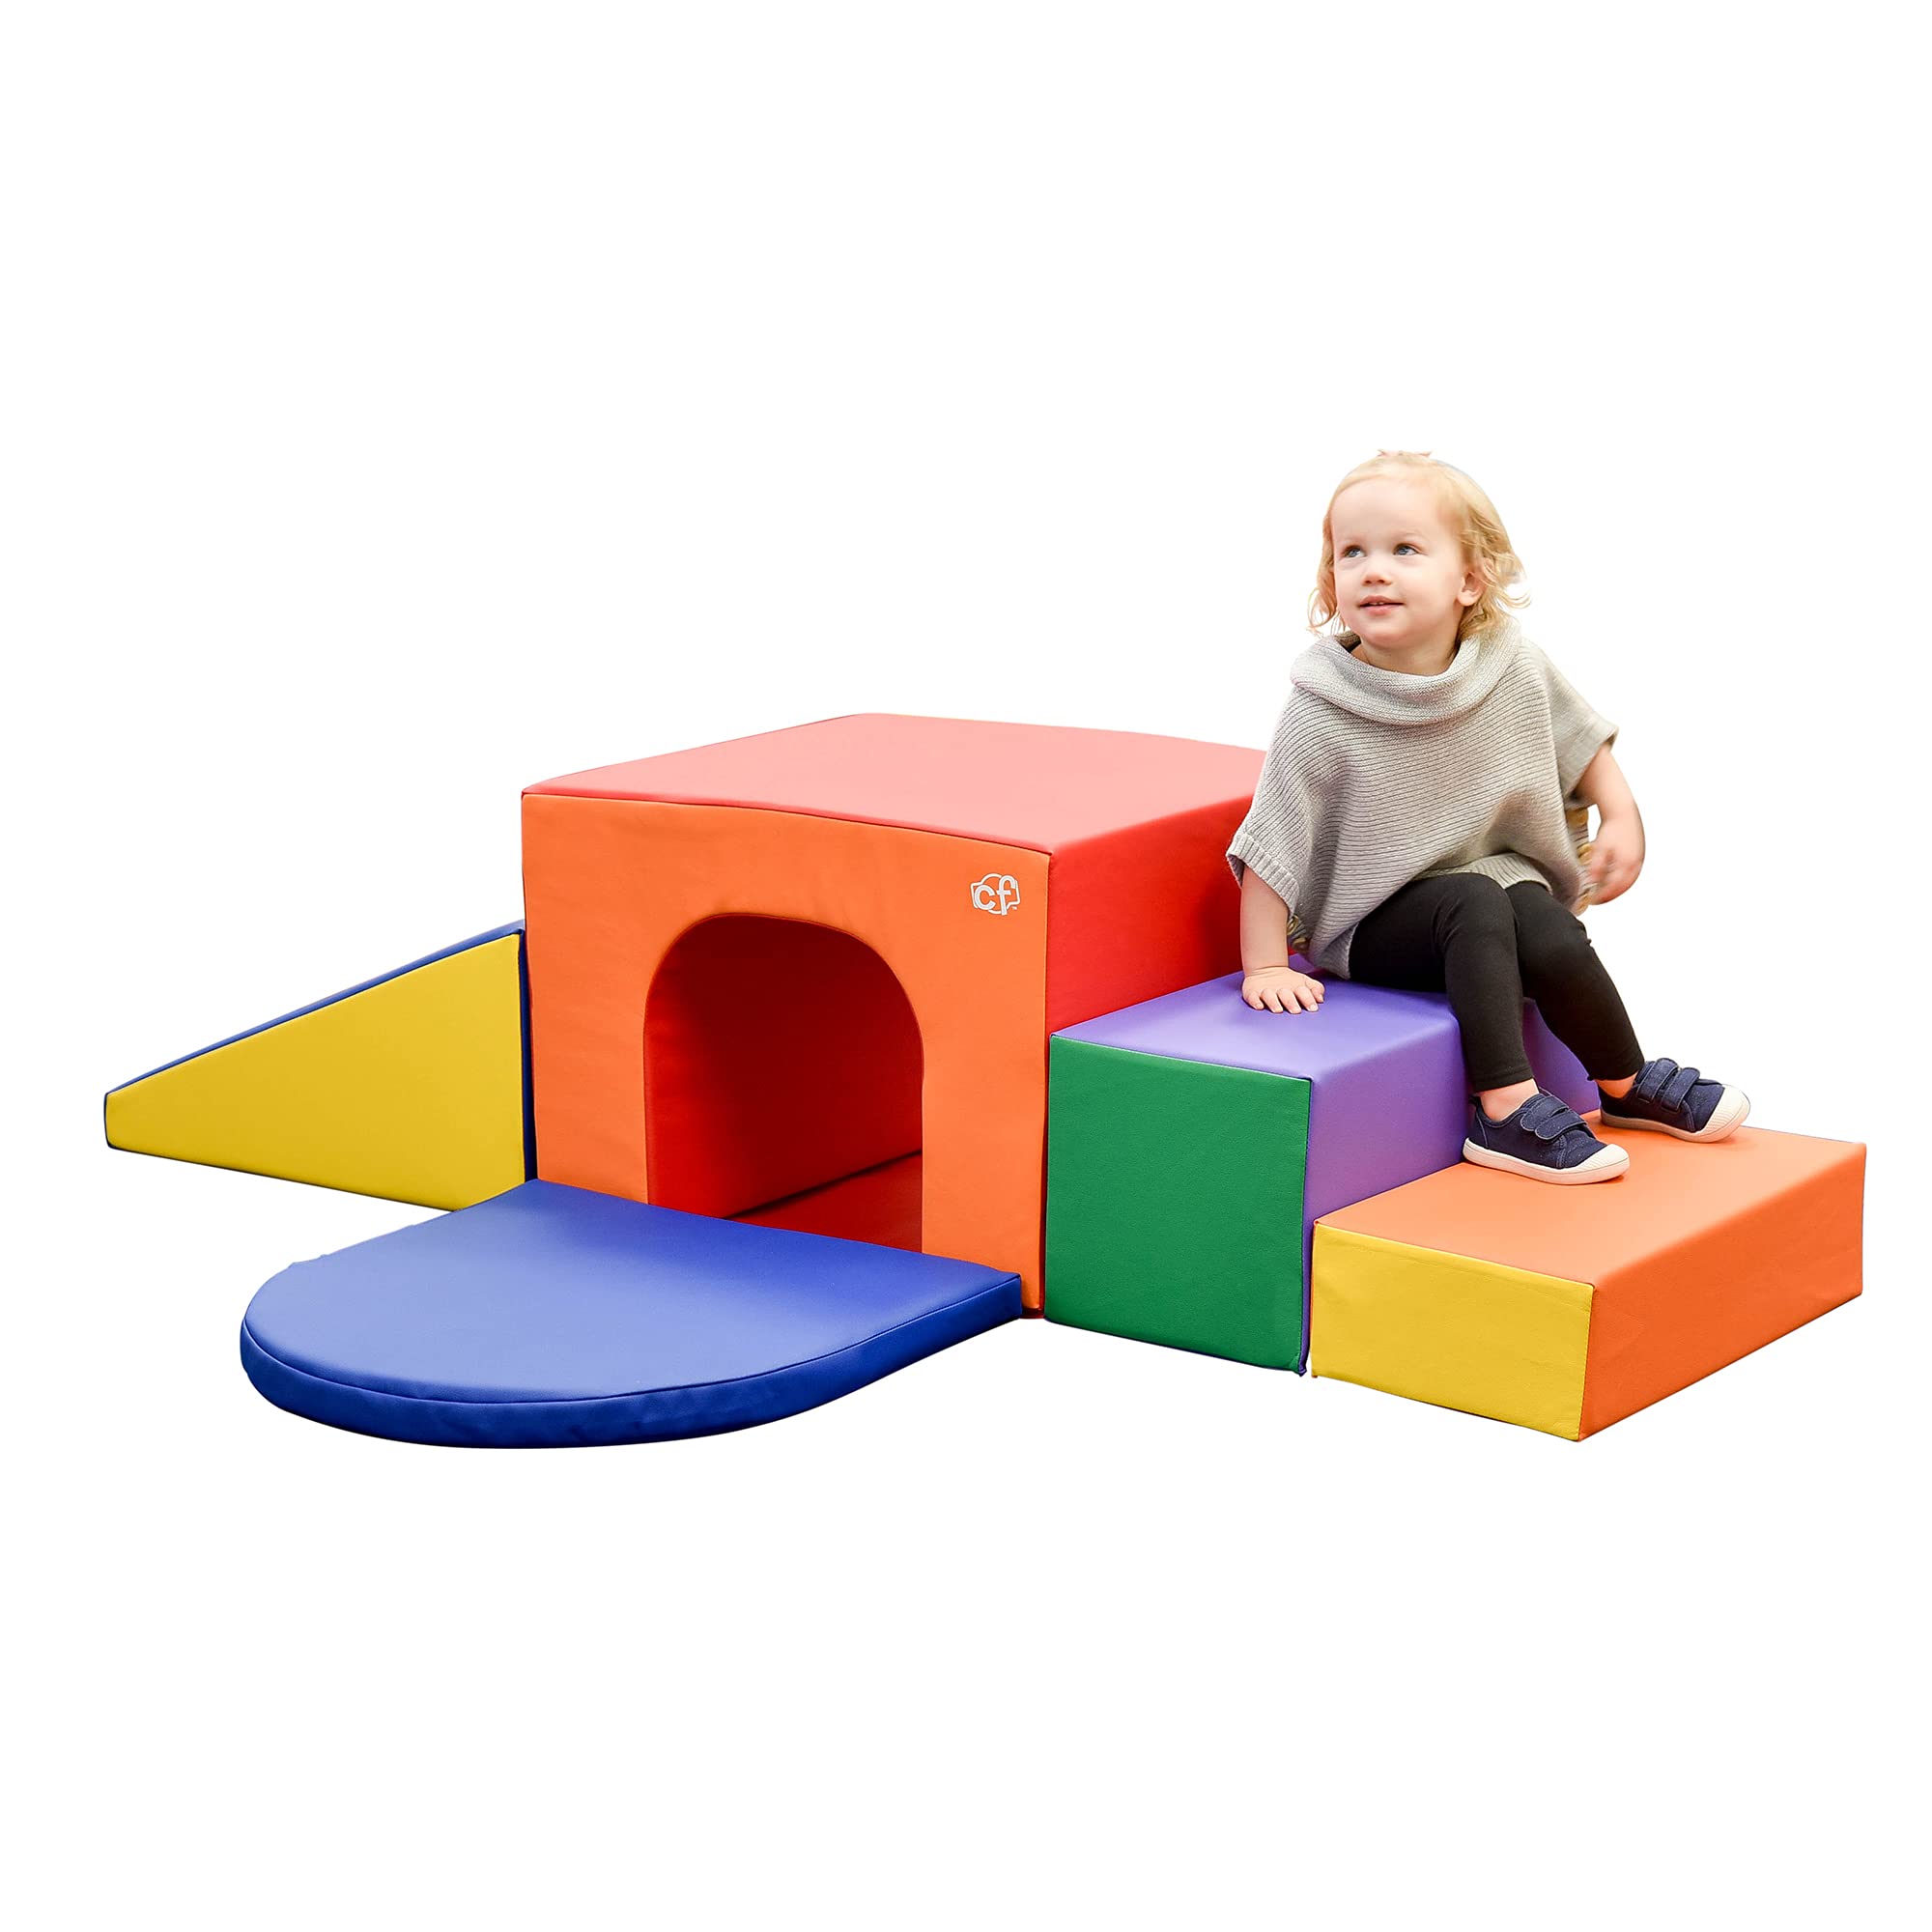 Children's Factory Soft Tunnel Climber, Primary, CF321-049, Toddler and Baby Climbing Learning Set, Playroom, Daycare and Classroom Indoor Playground